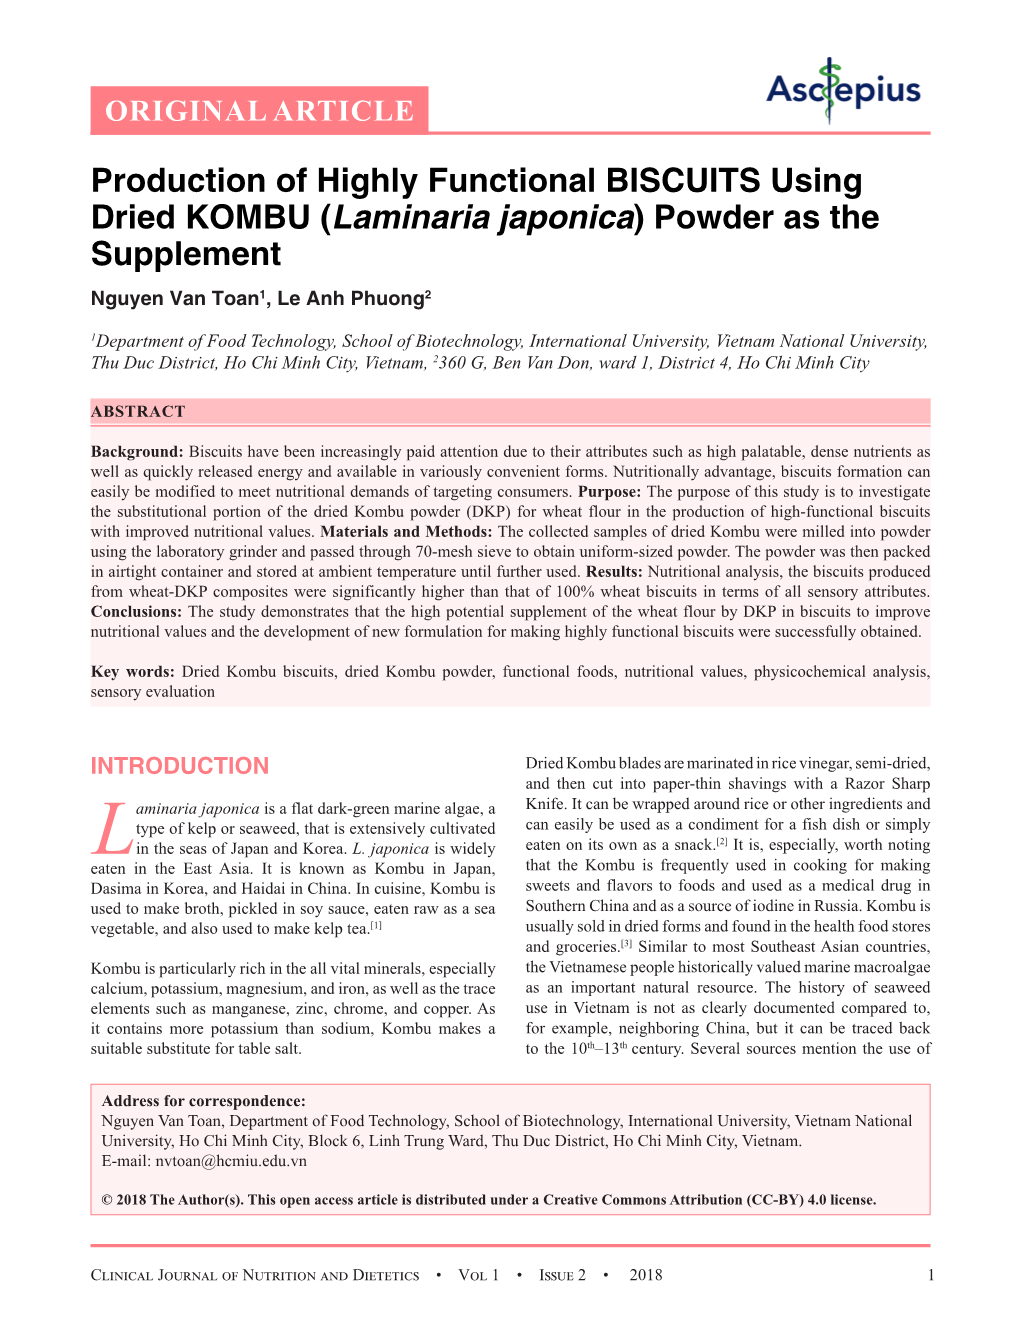 Production of Highly Functional BISCUITS Using Dried KOMBU (Laminaria Japonica) Powder As the Supplement Nguyen Van Toan1, Le Anh Phuong2